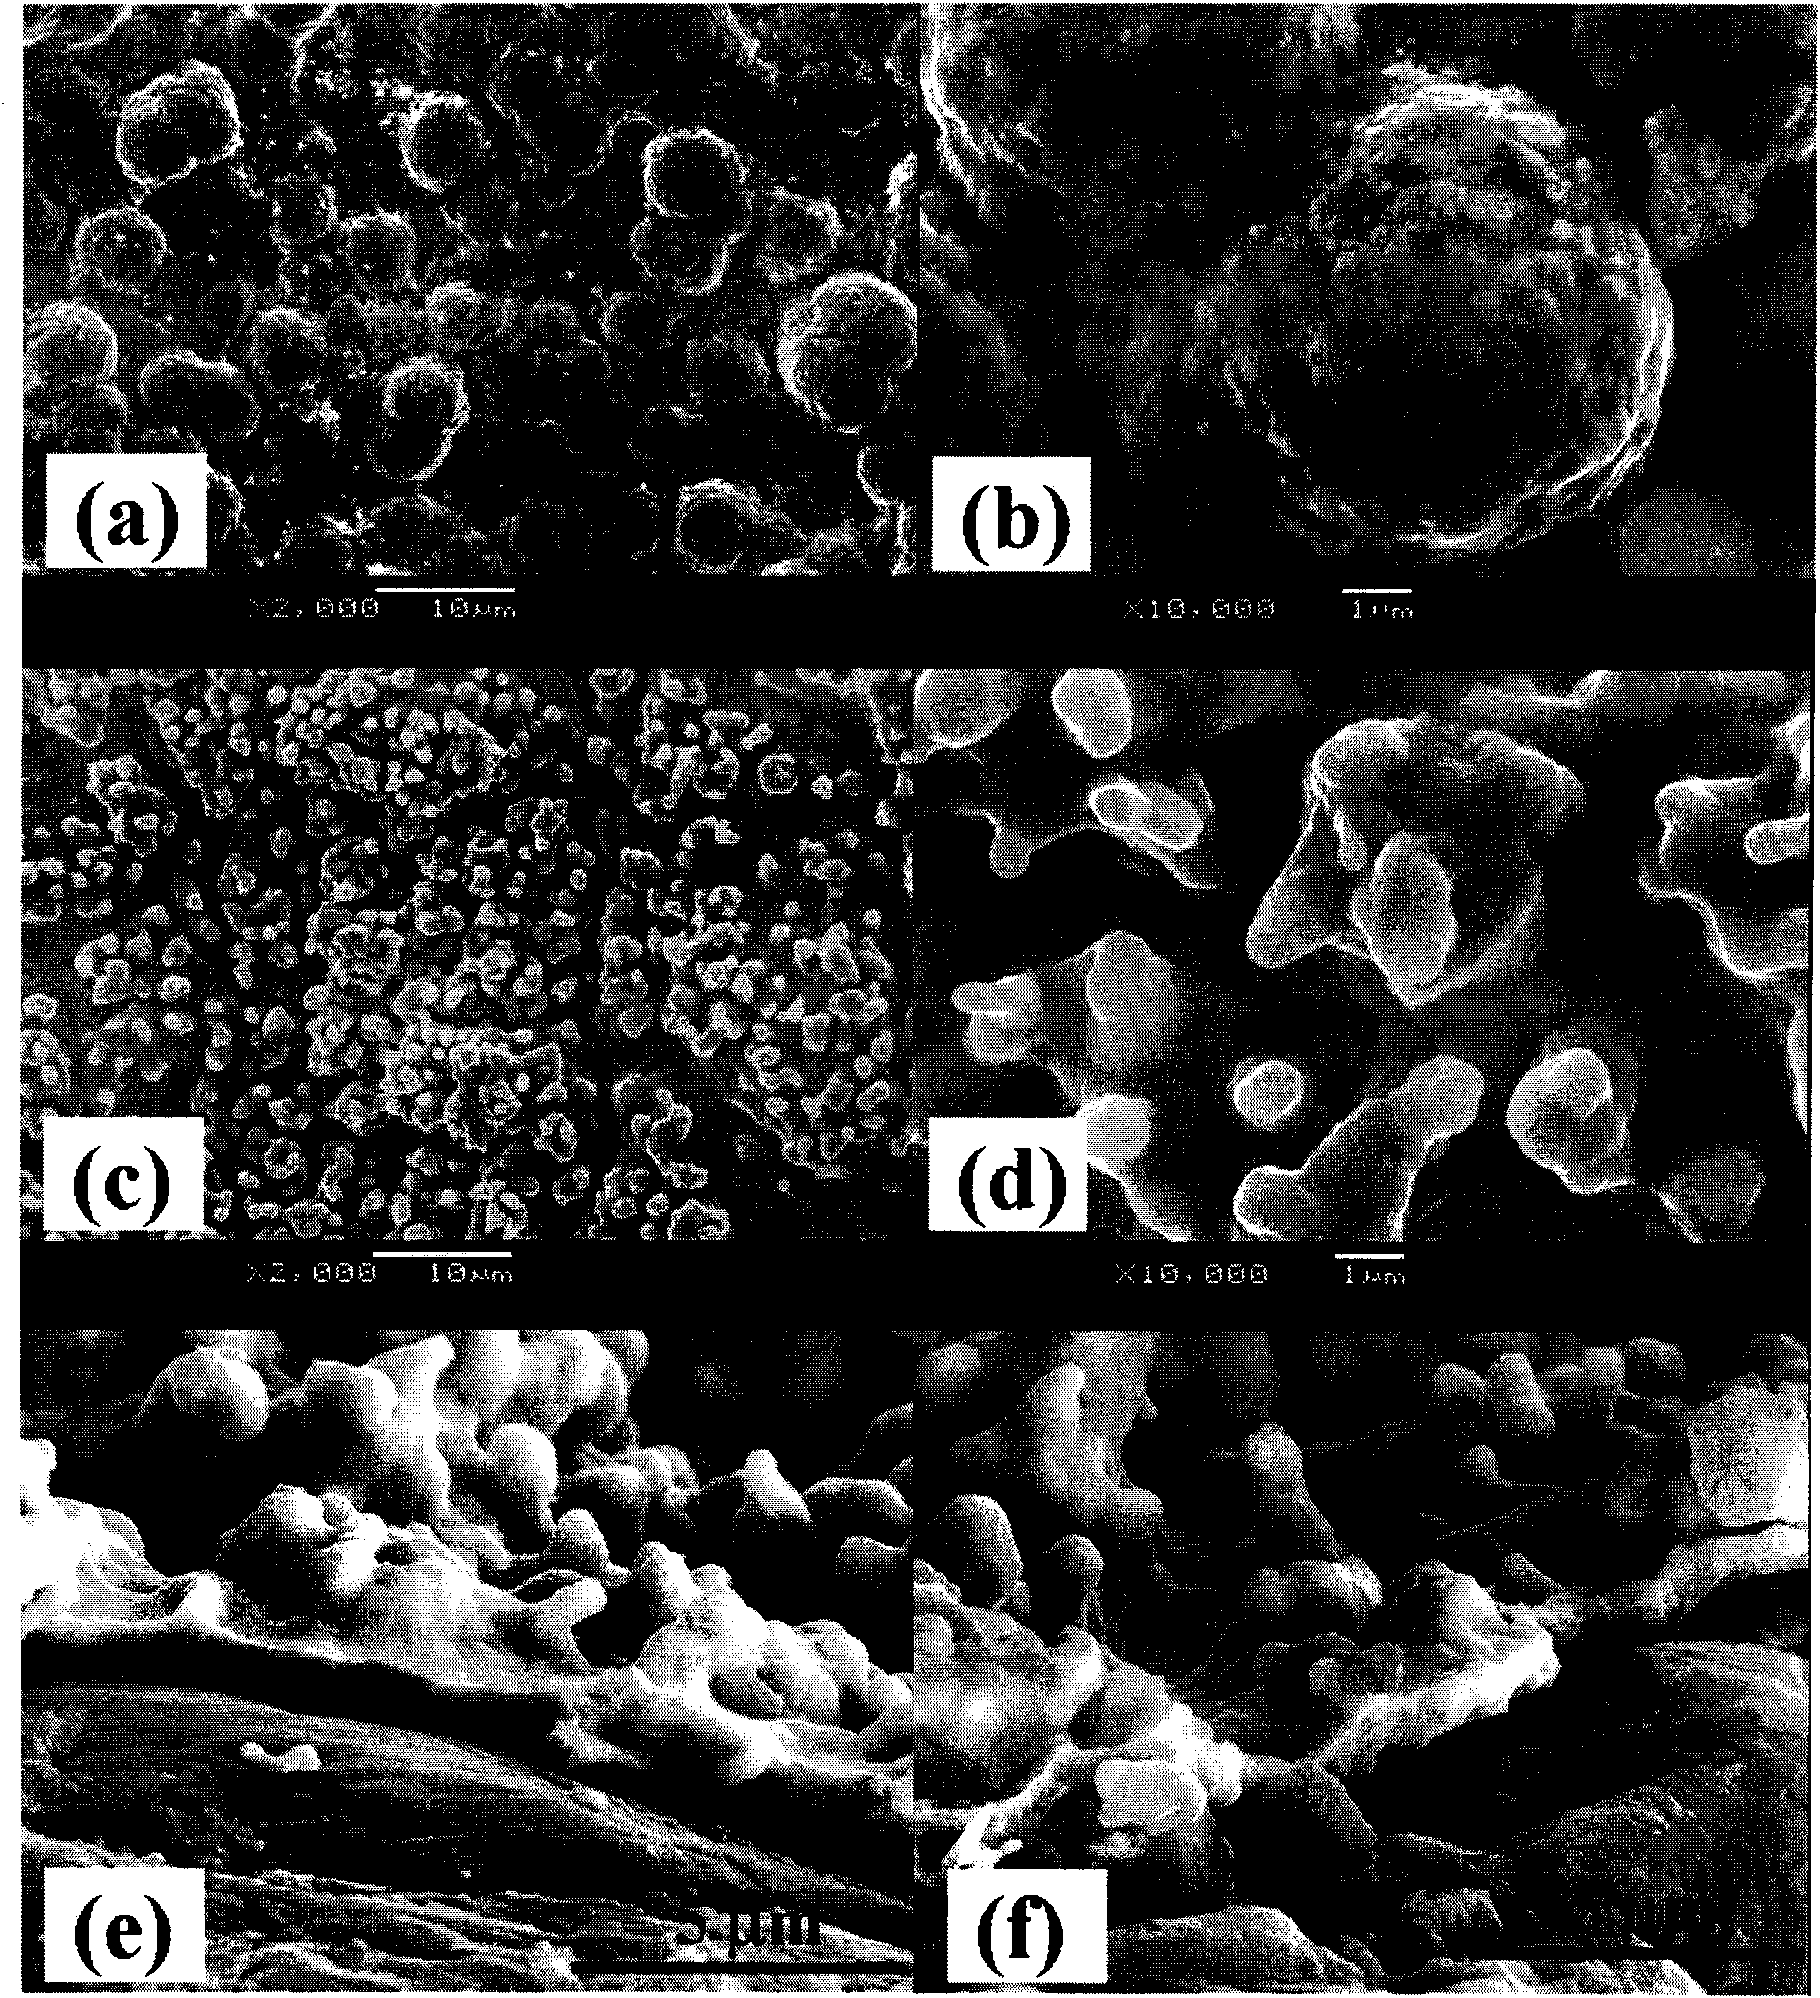 Chemical plating method for preparing ultrathin palladium film with high specific surface area